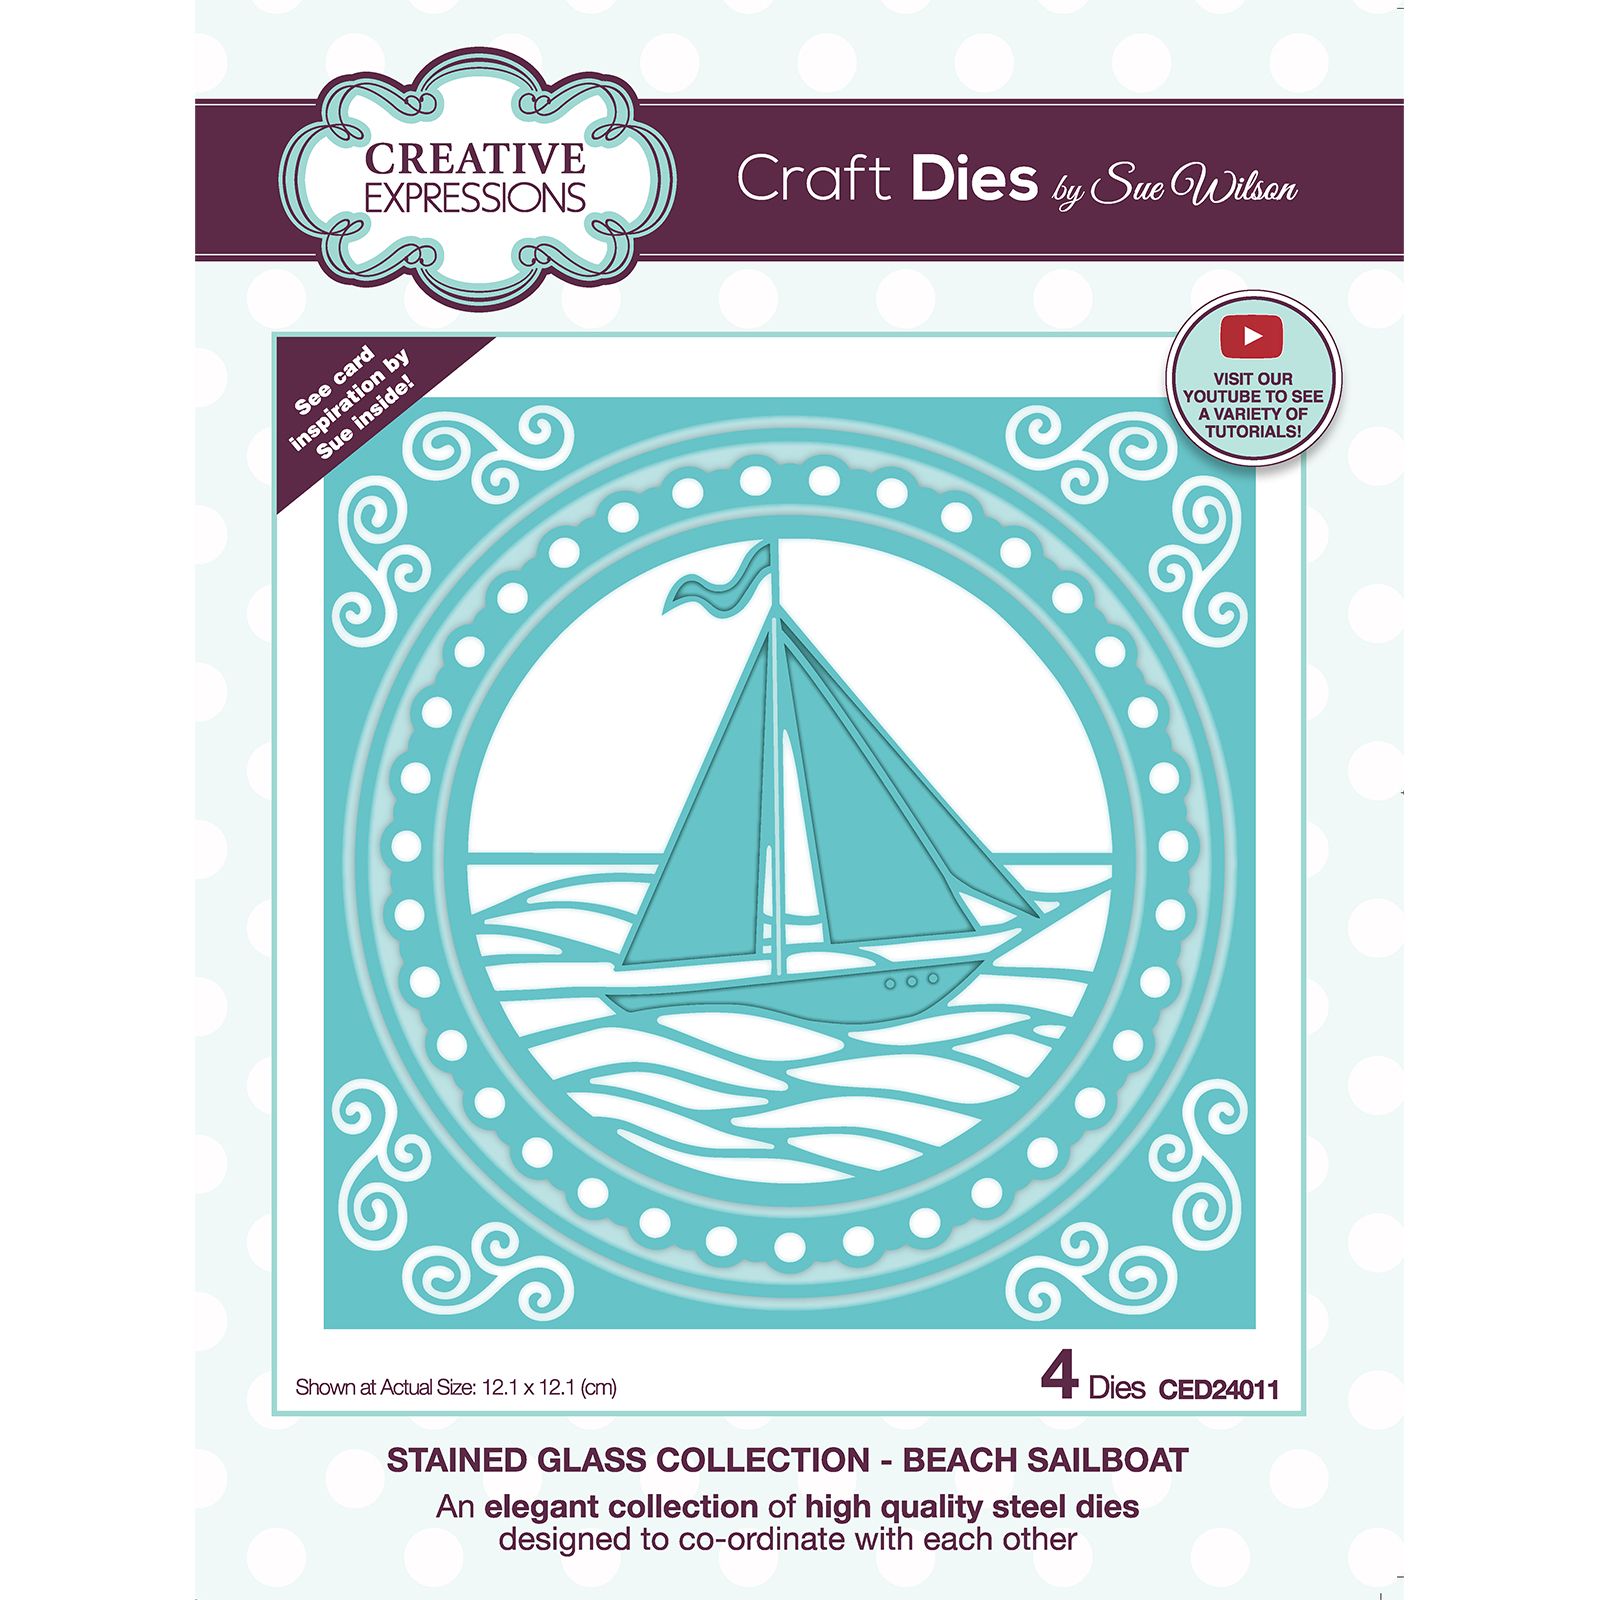 Creative Expressions • Craft Die Stained Glass Collection Beach Sailboat